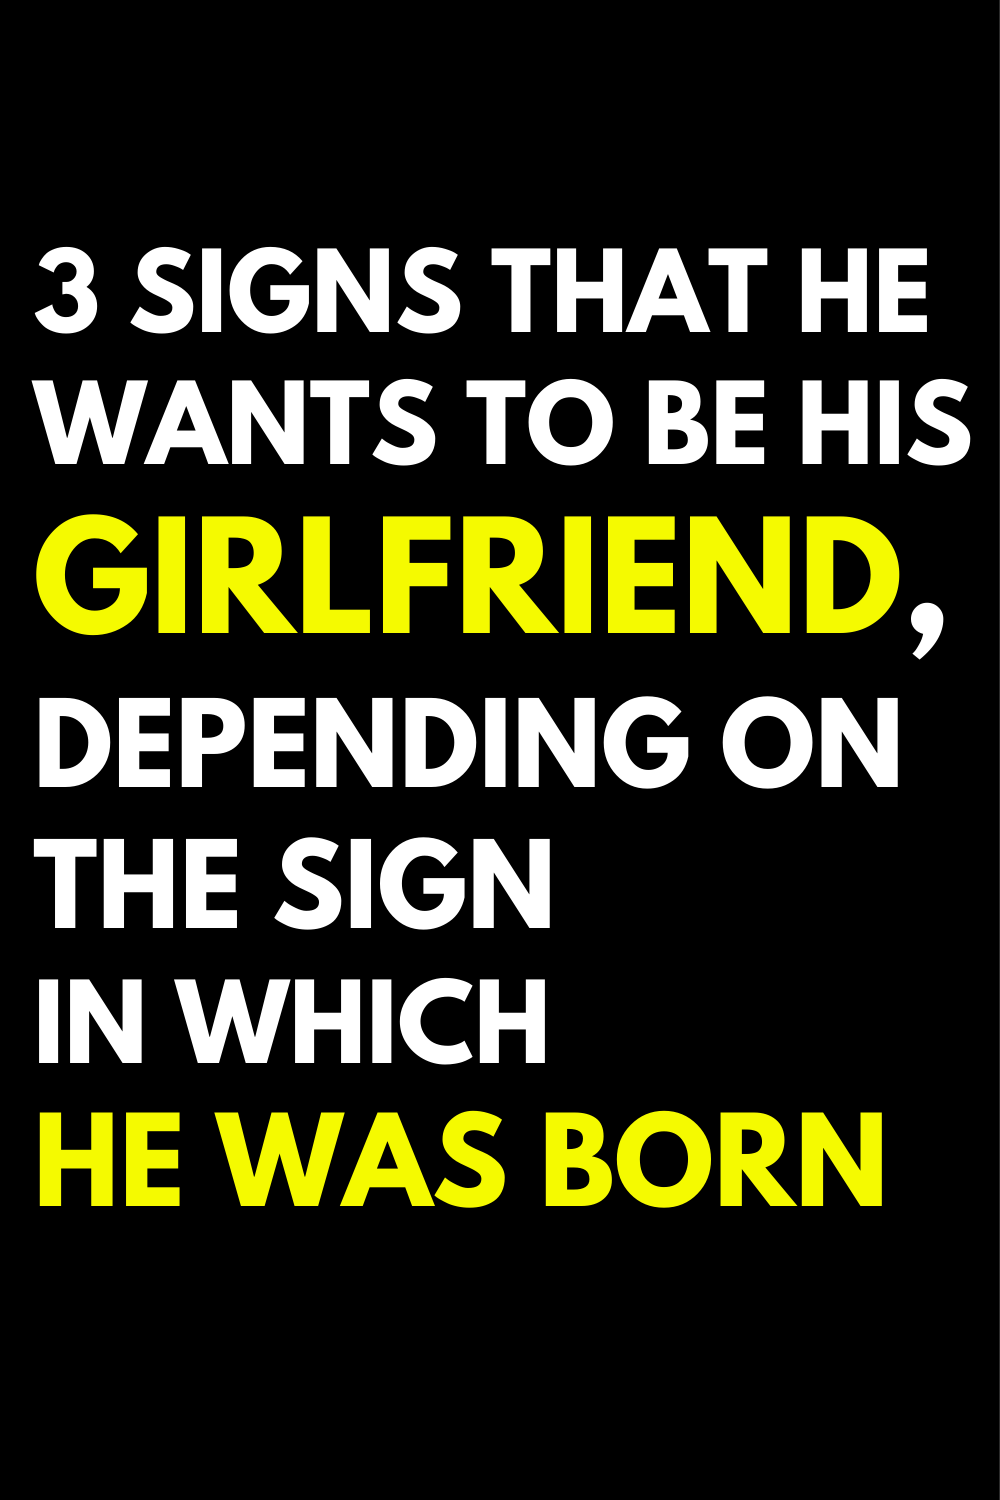 3 signs that he wants to be his girlfriend, depending on the sign in which he was born